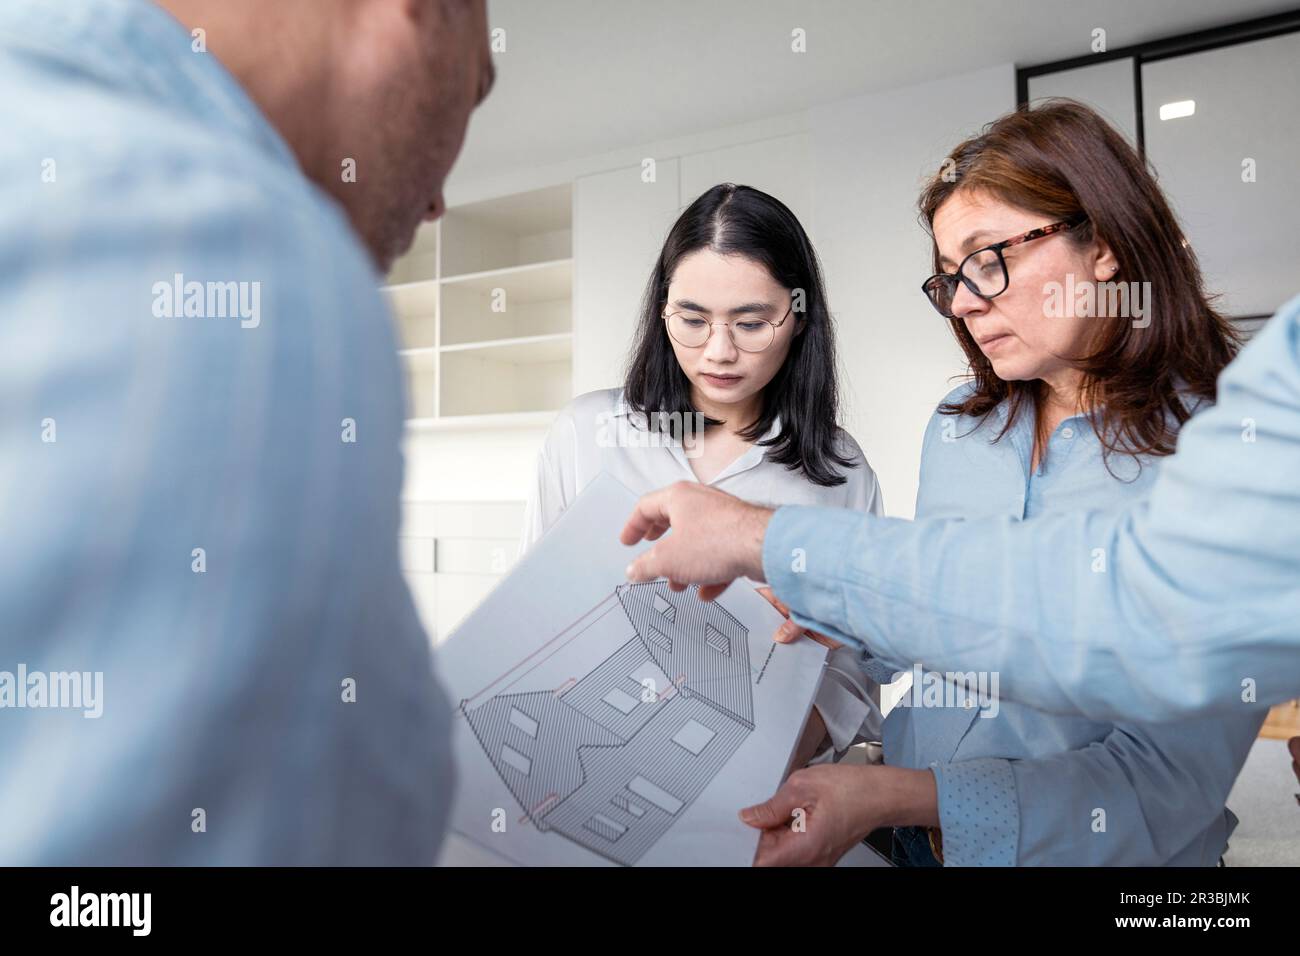 Business people working together on an architectural project in office Stock Photo